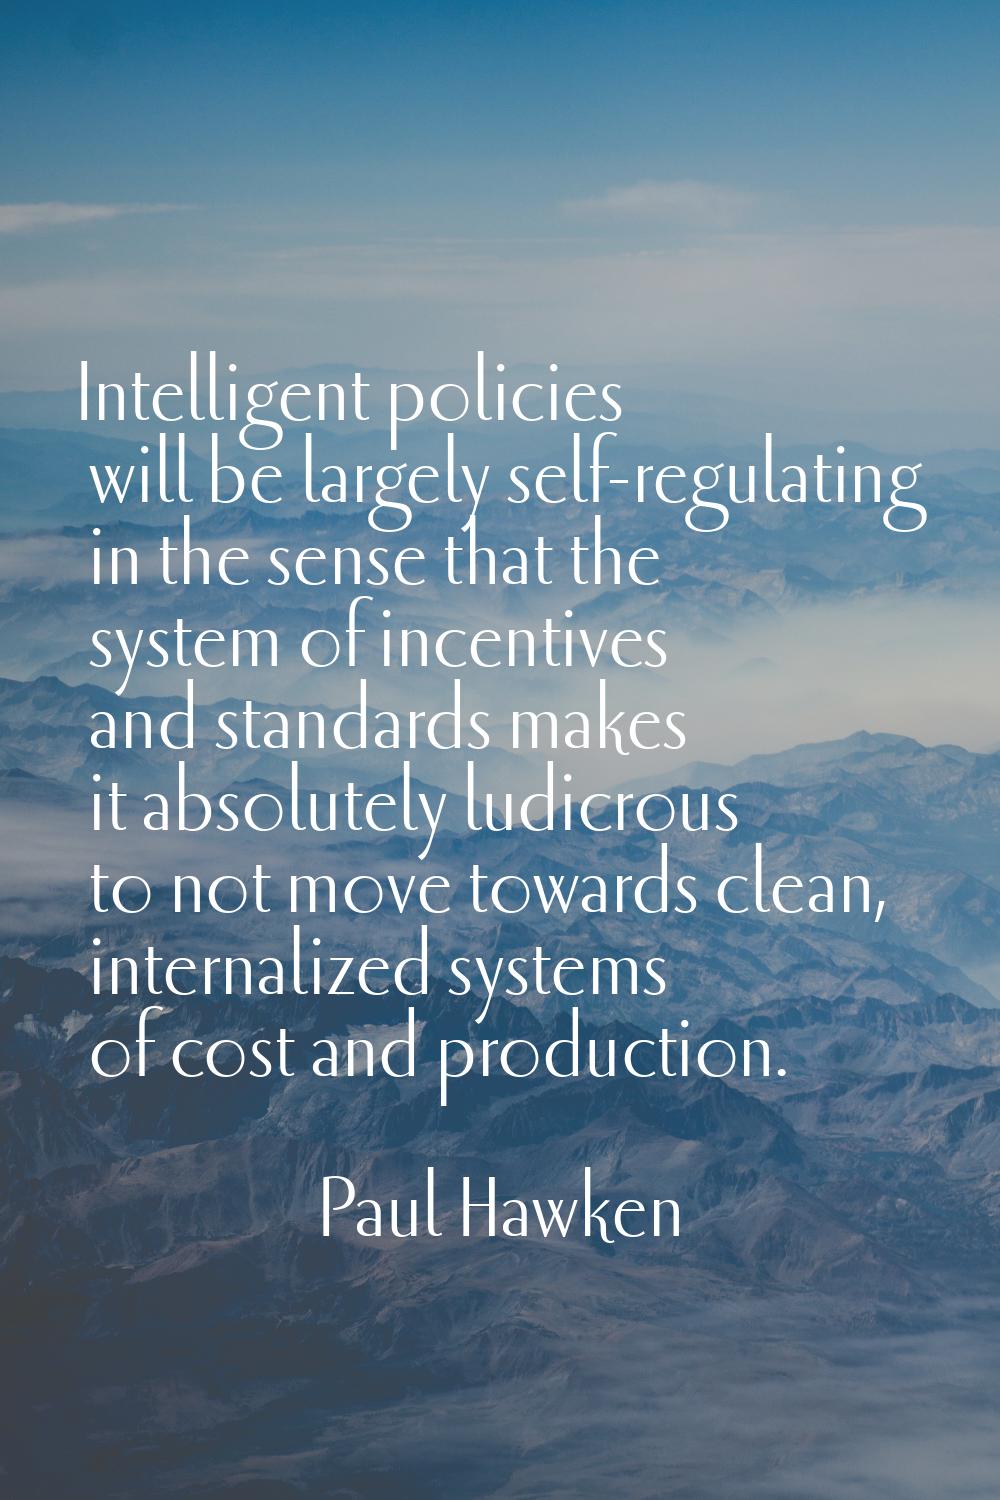 Intelligent policies will be largely self-regulating in the sense that the system of incentives and